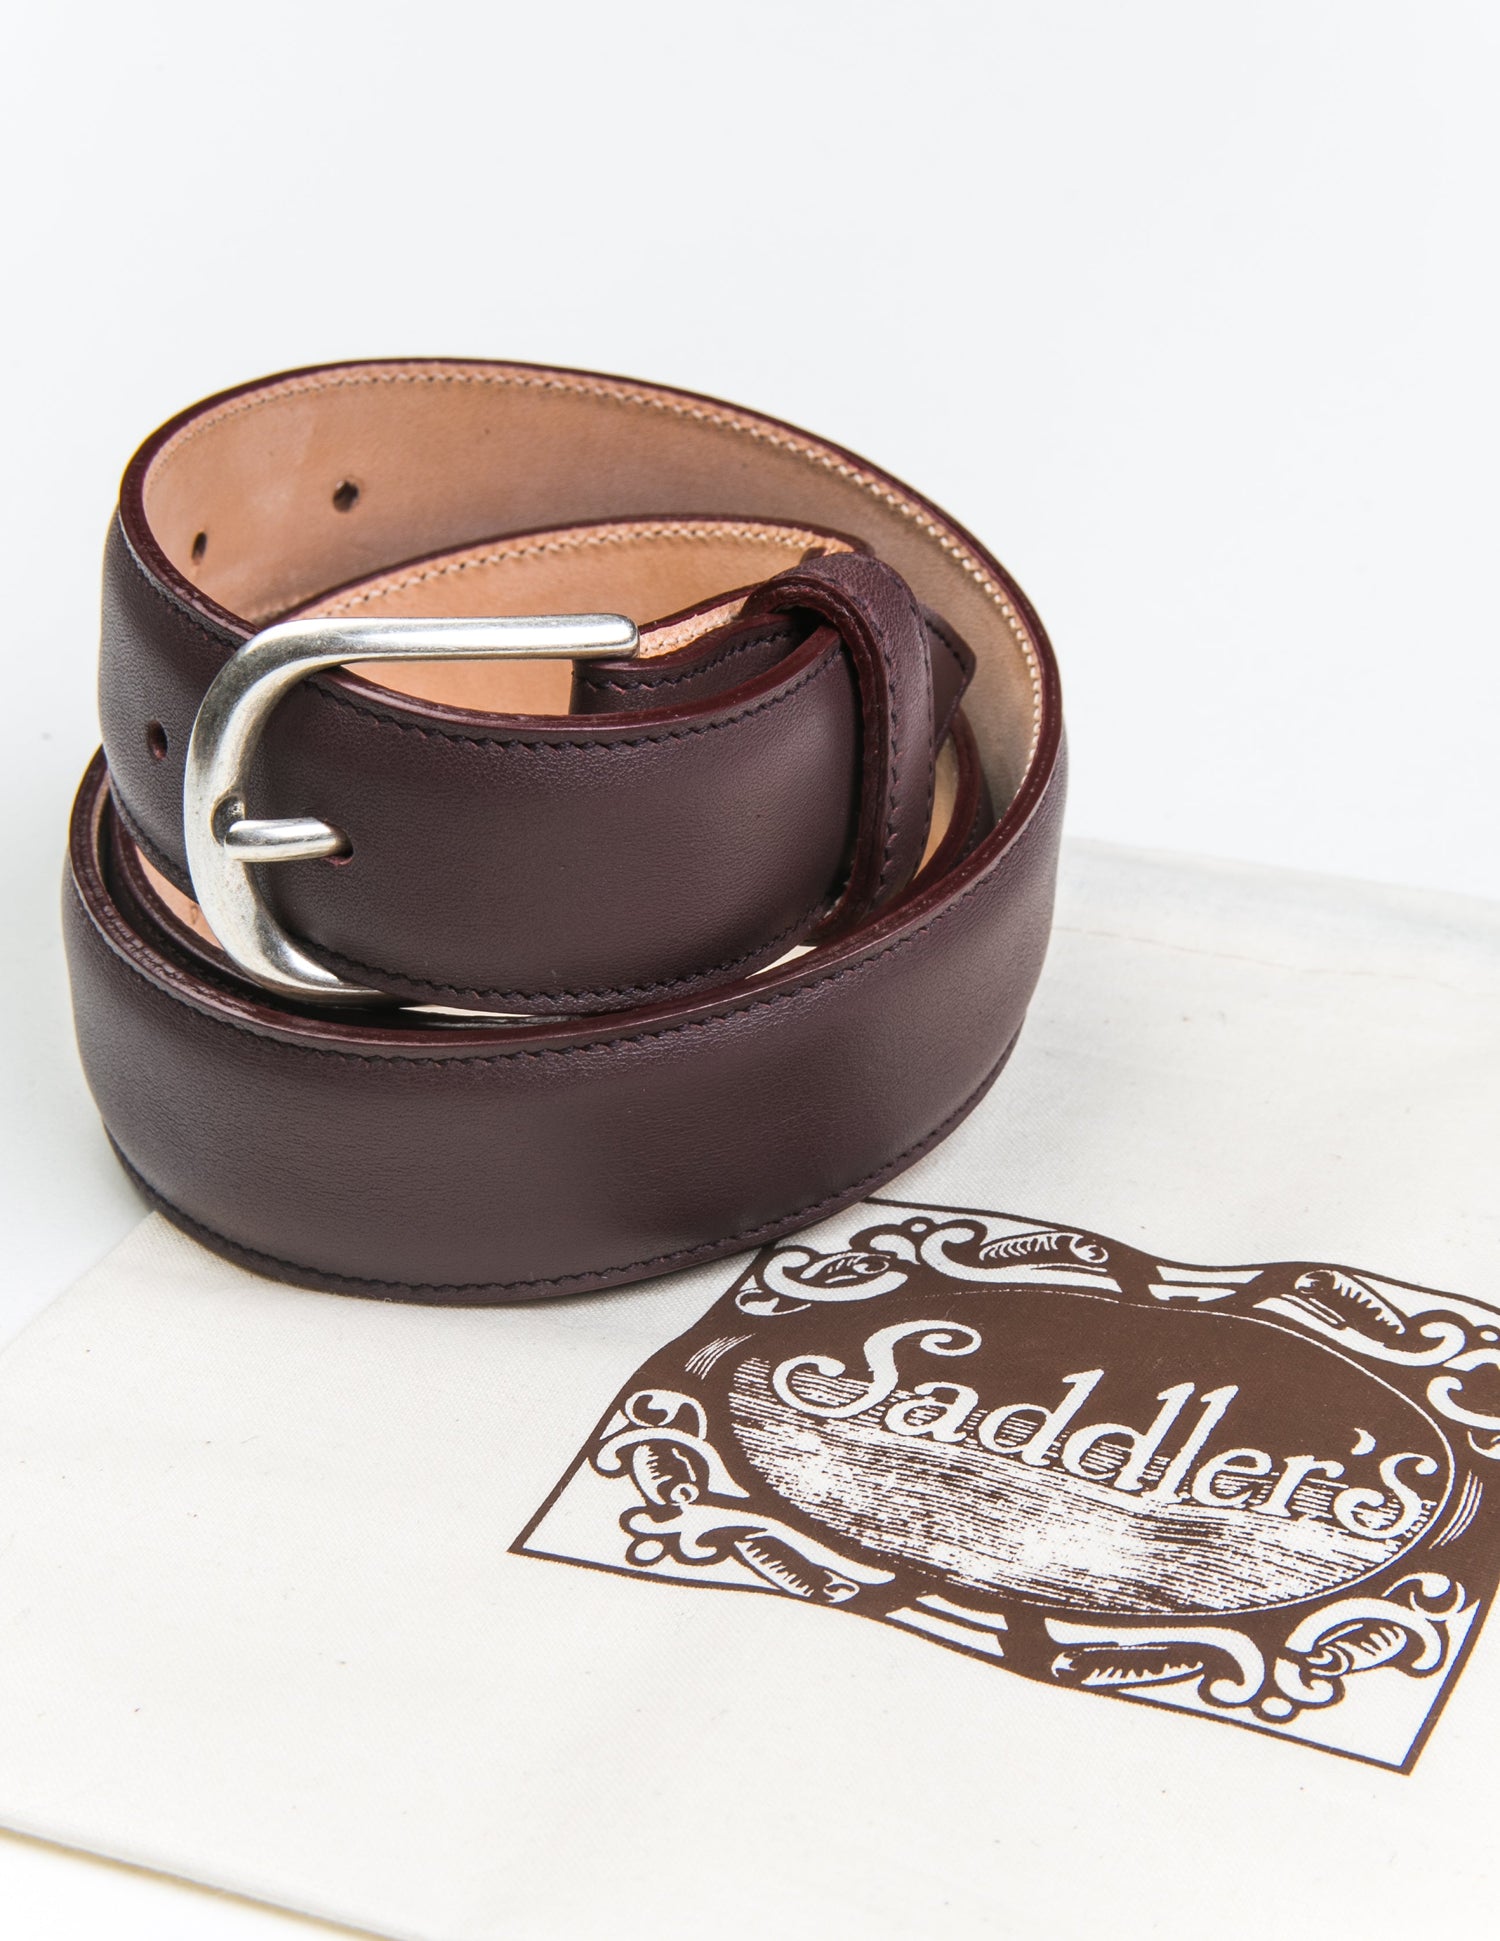 Photo of Brooklyn Tailors x Saddler's 30mm Belt in Smooth Leather - Bordo coiled next to the fabric bag it's sold with. 